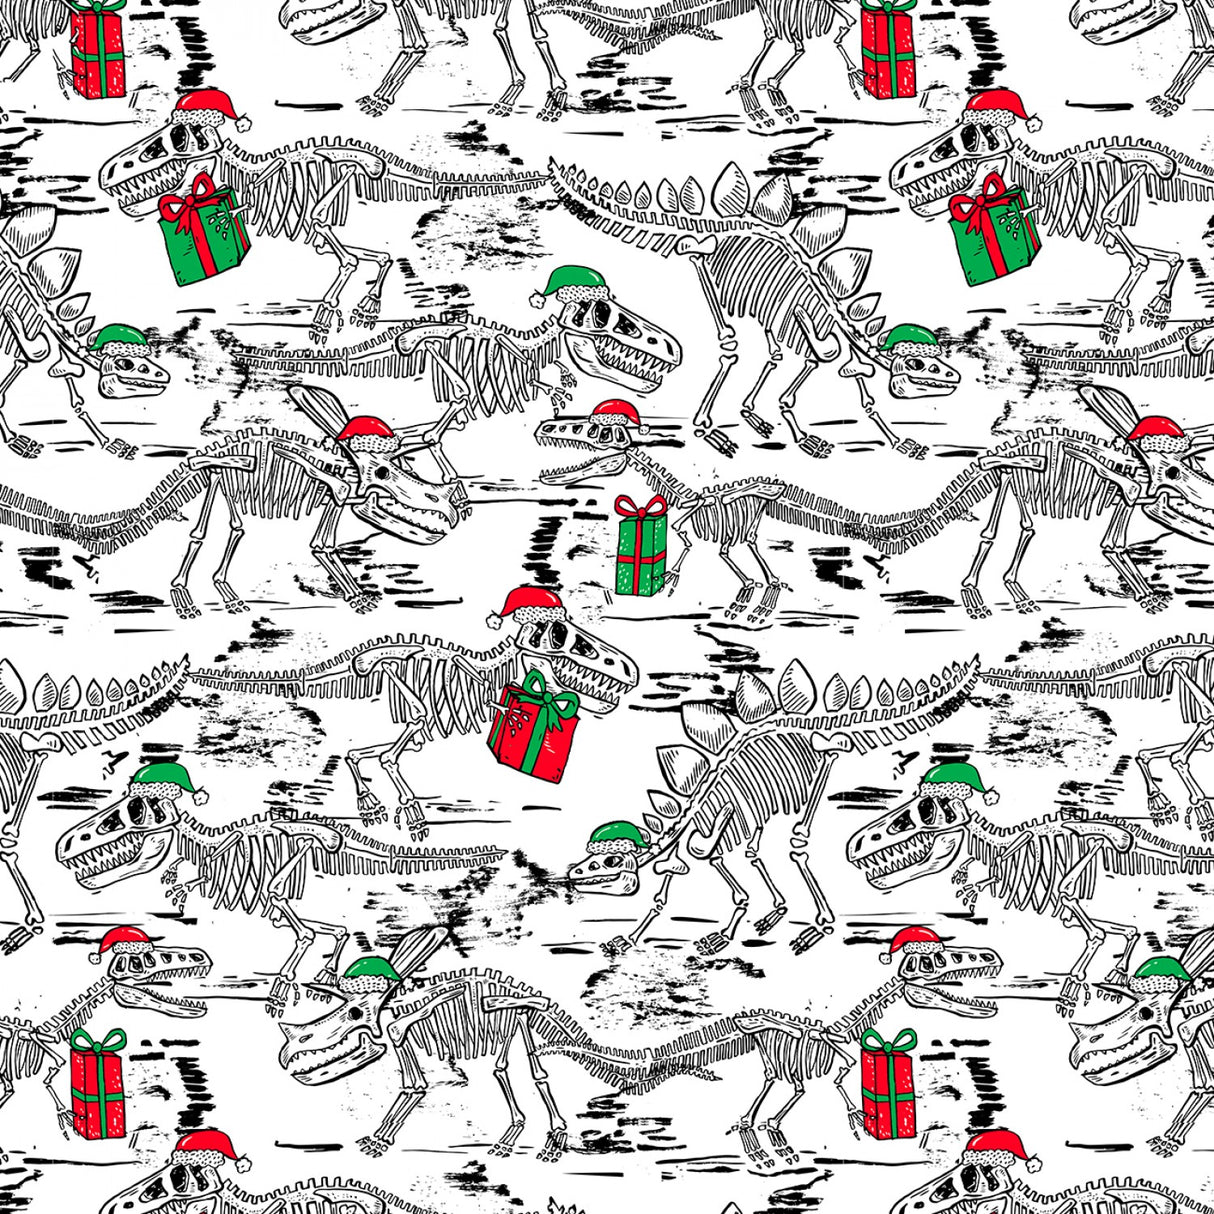 White Holiday Skeleton Dinos Fabric by Timeless Treasures